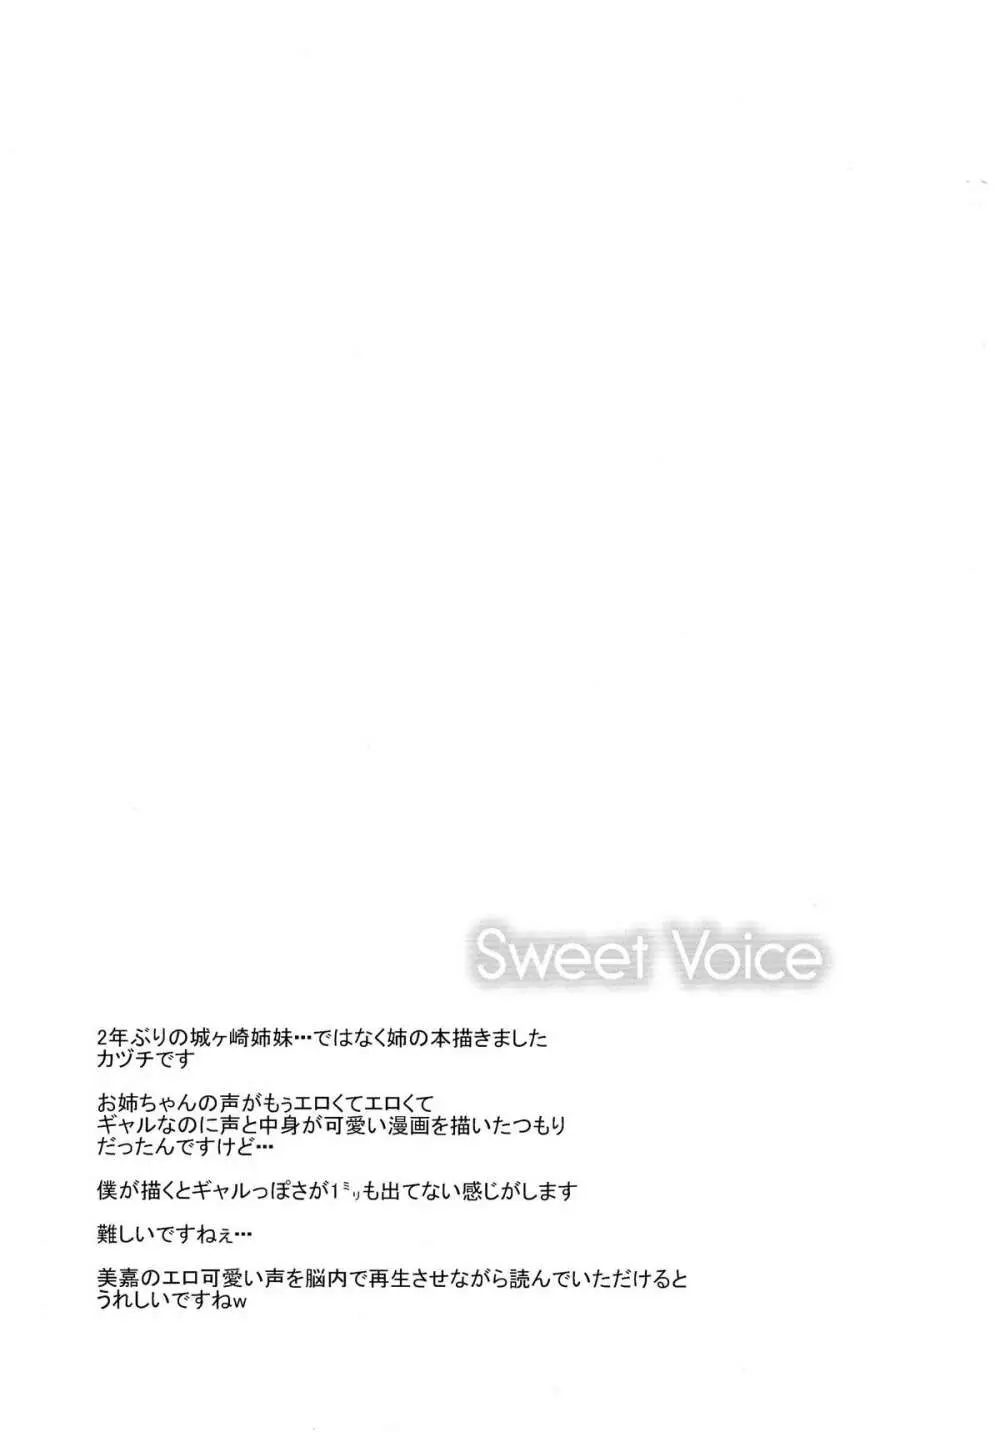 Sweet Voice Page.4